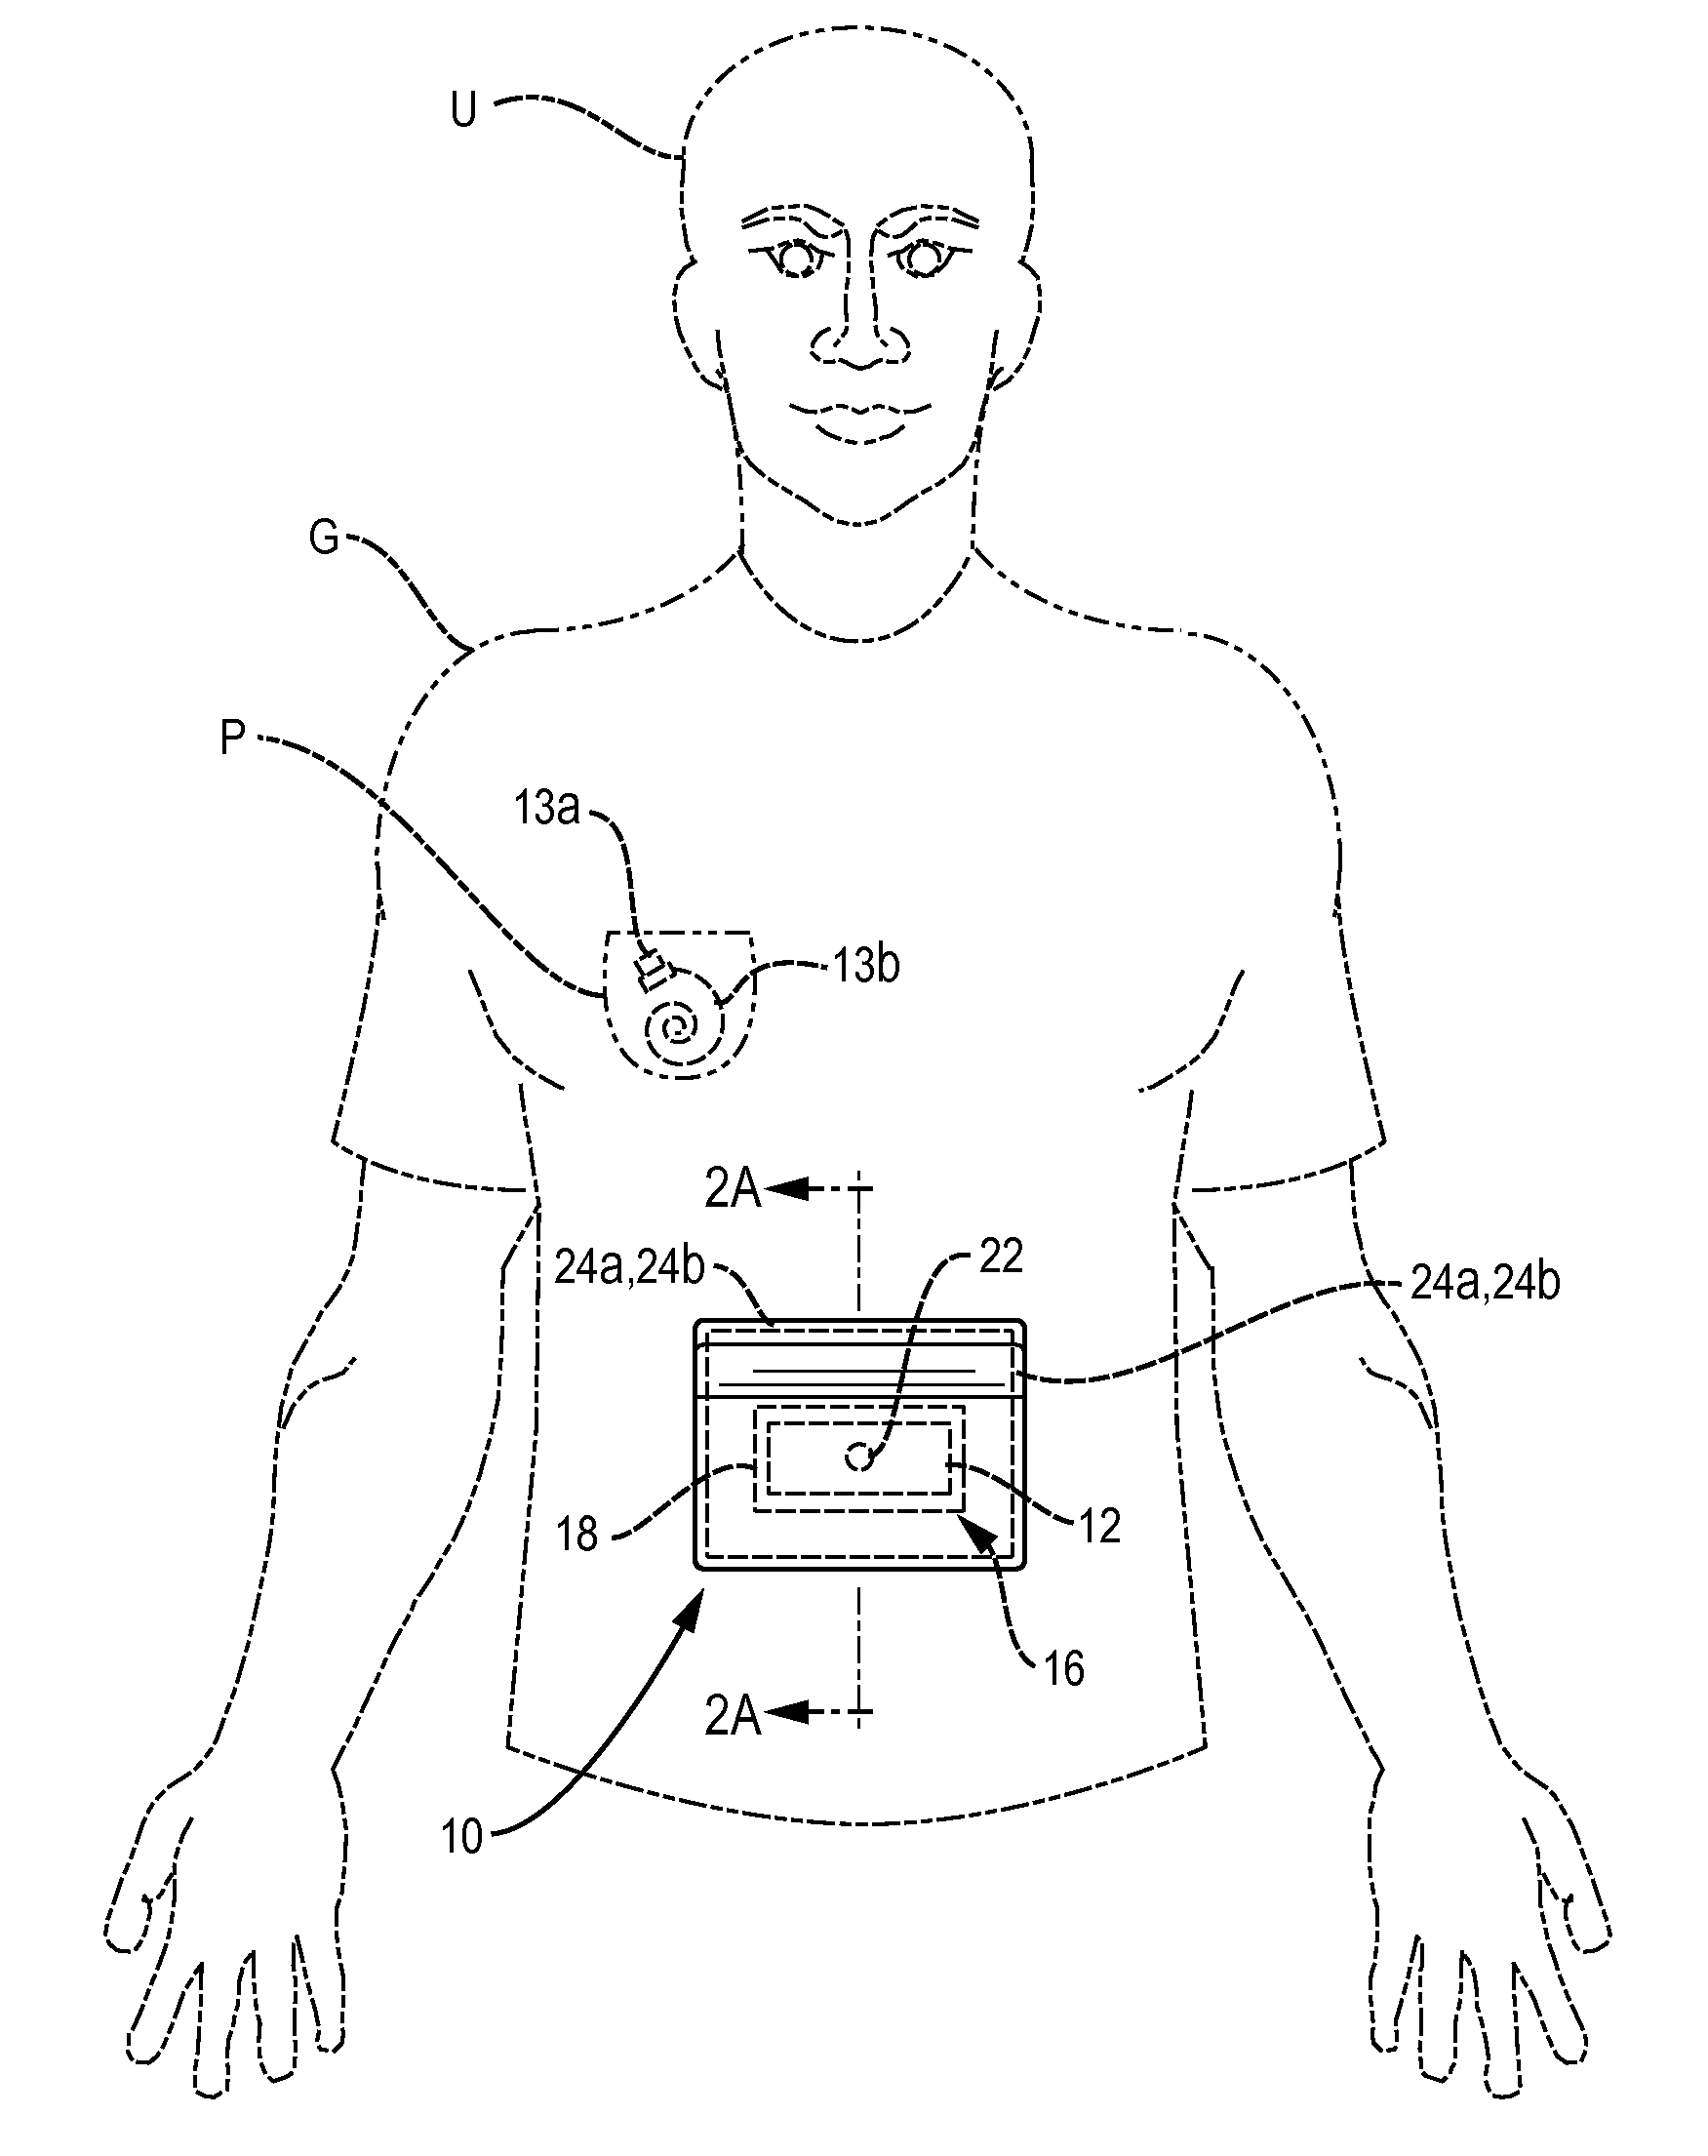 User interface securing assembly